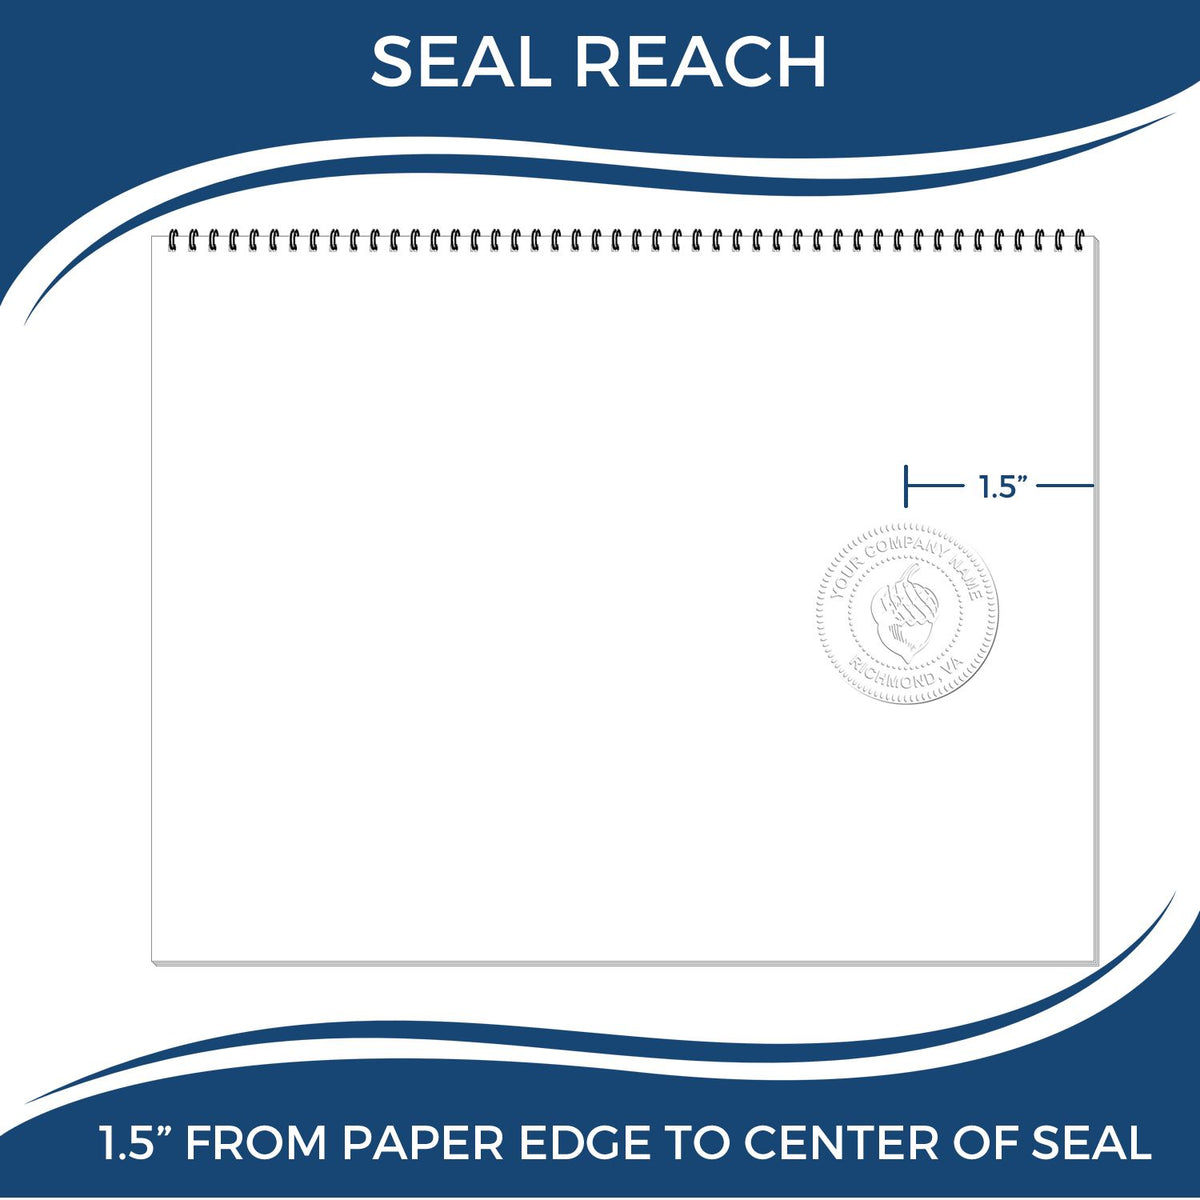 An infographic showing the seal reach which is represented by a ruler and a miniature seal image of the Connecticut Geologist Desk Seal